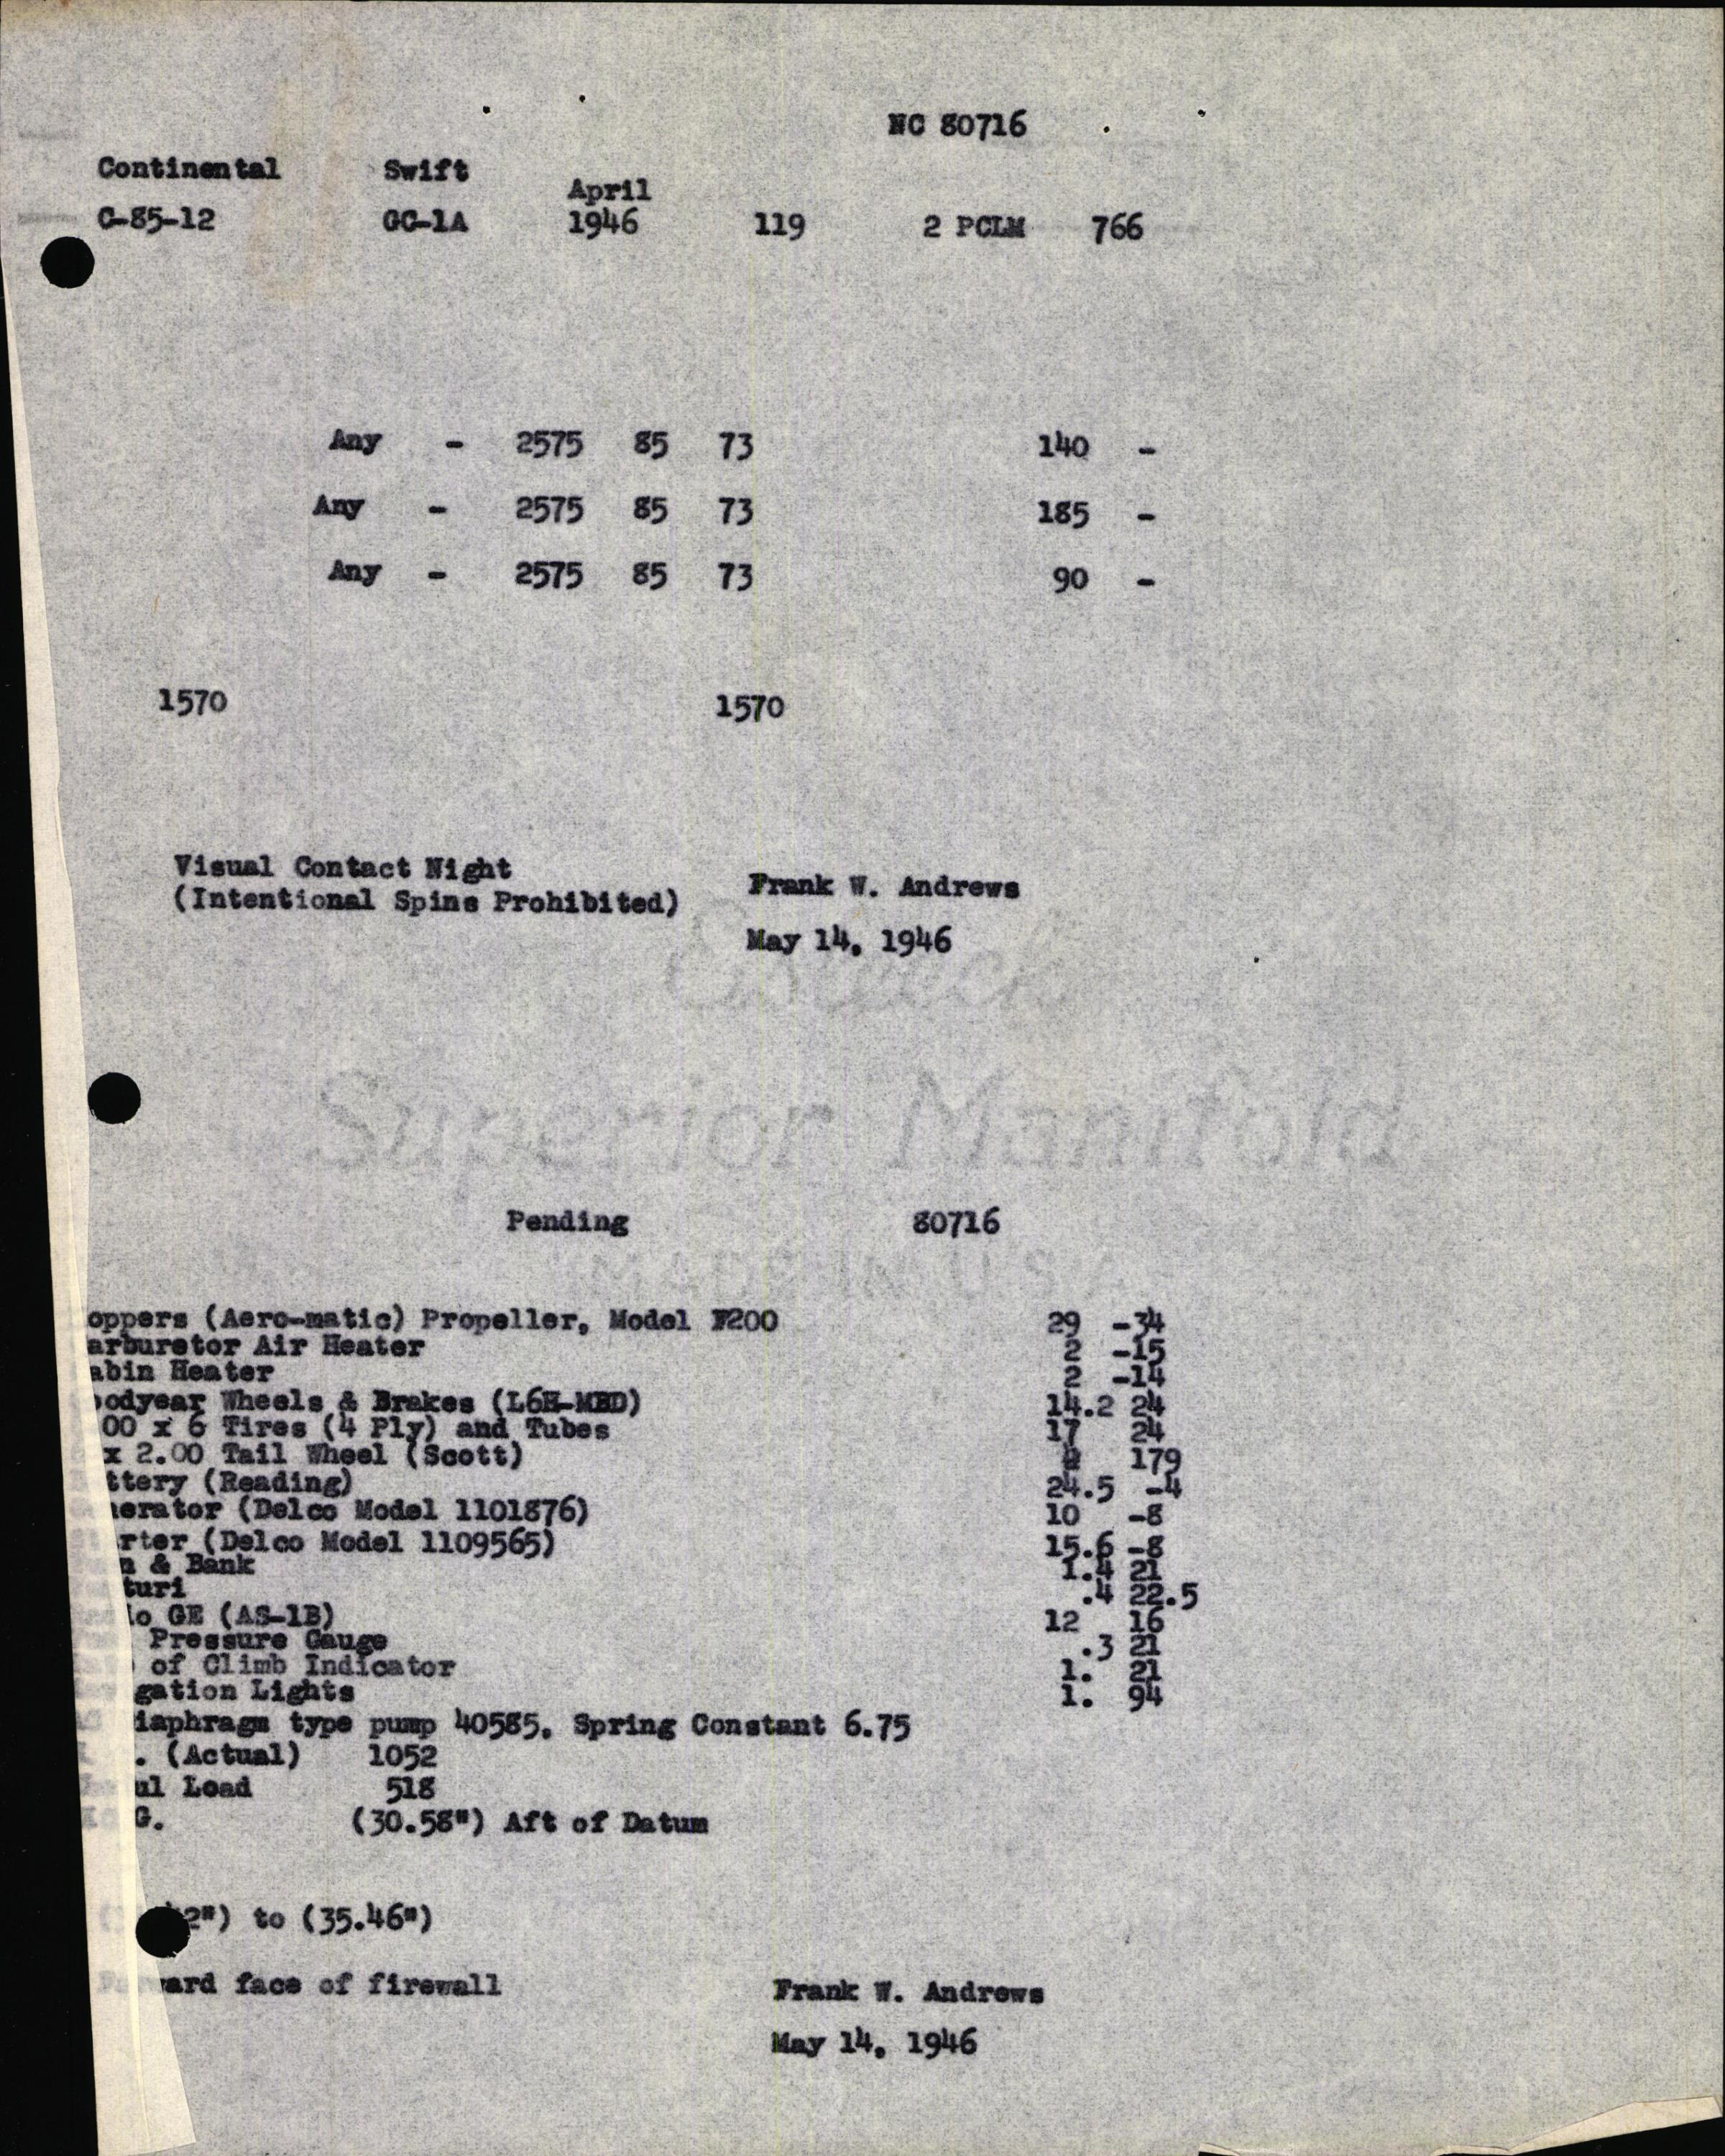 Sample page 11 from AirCorps Library document: Technical Information for Serial Number 119